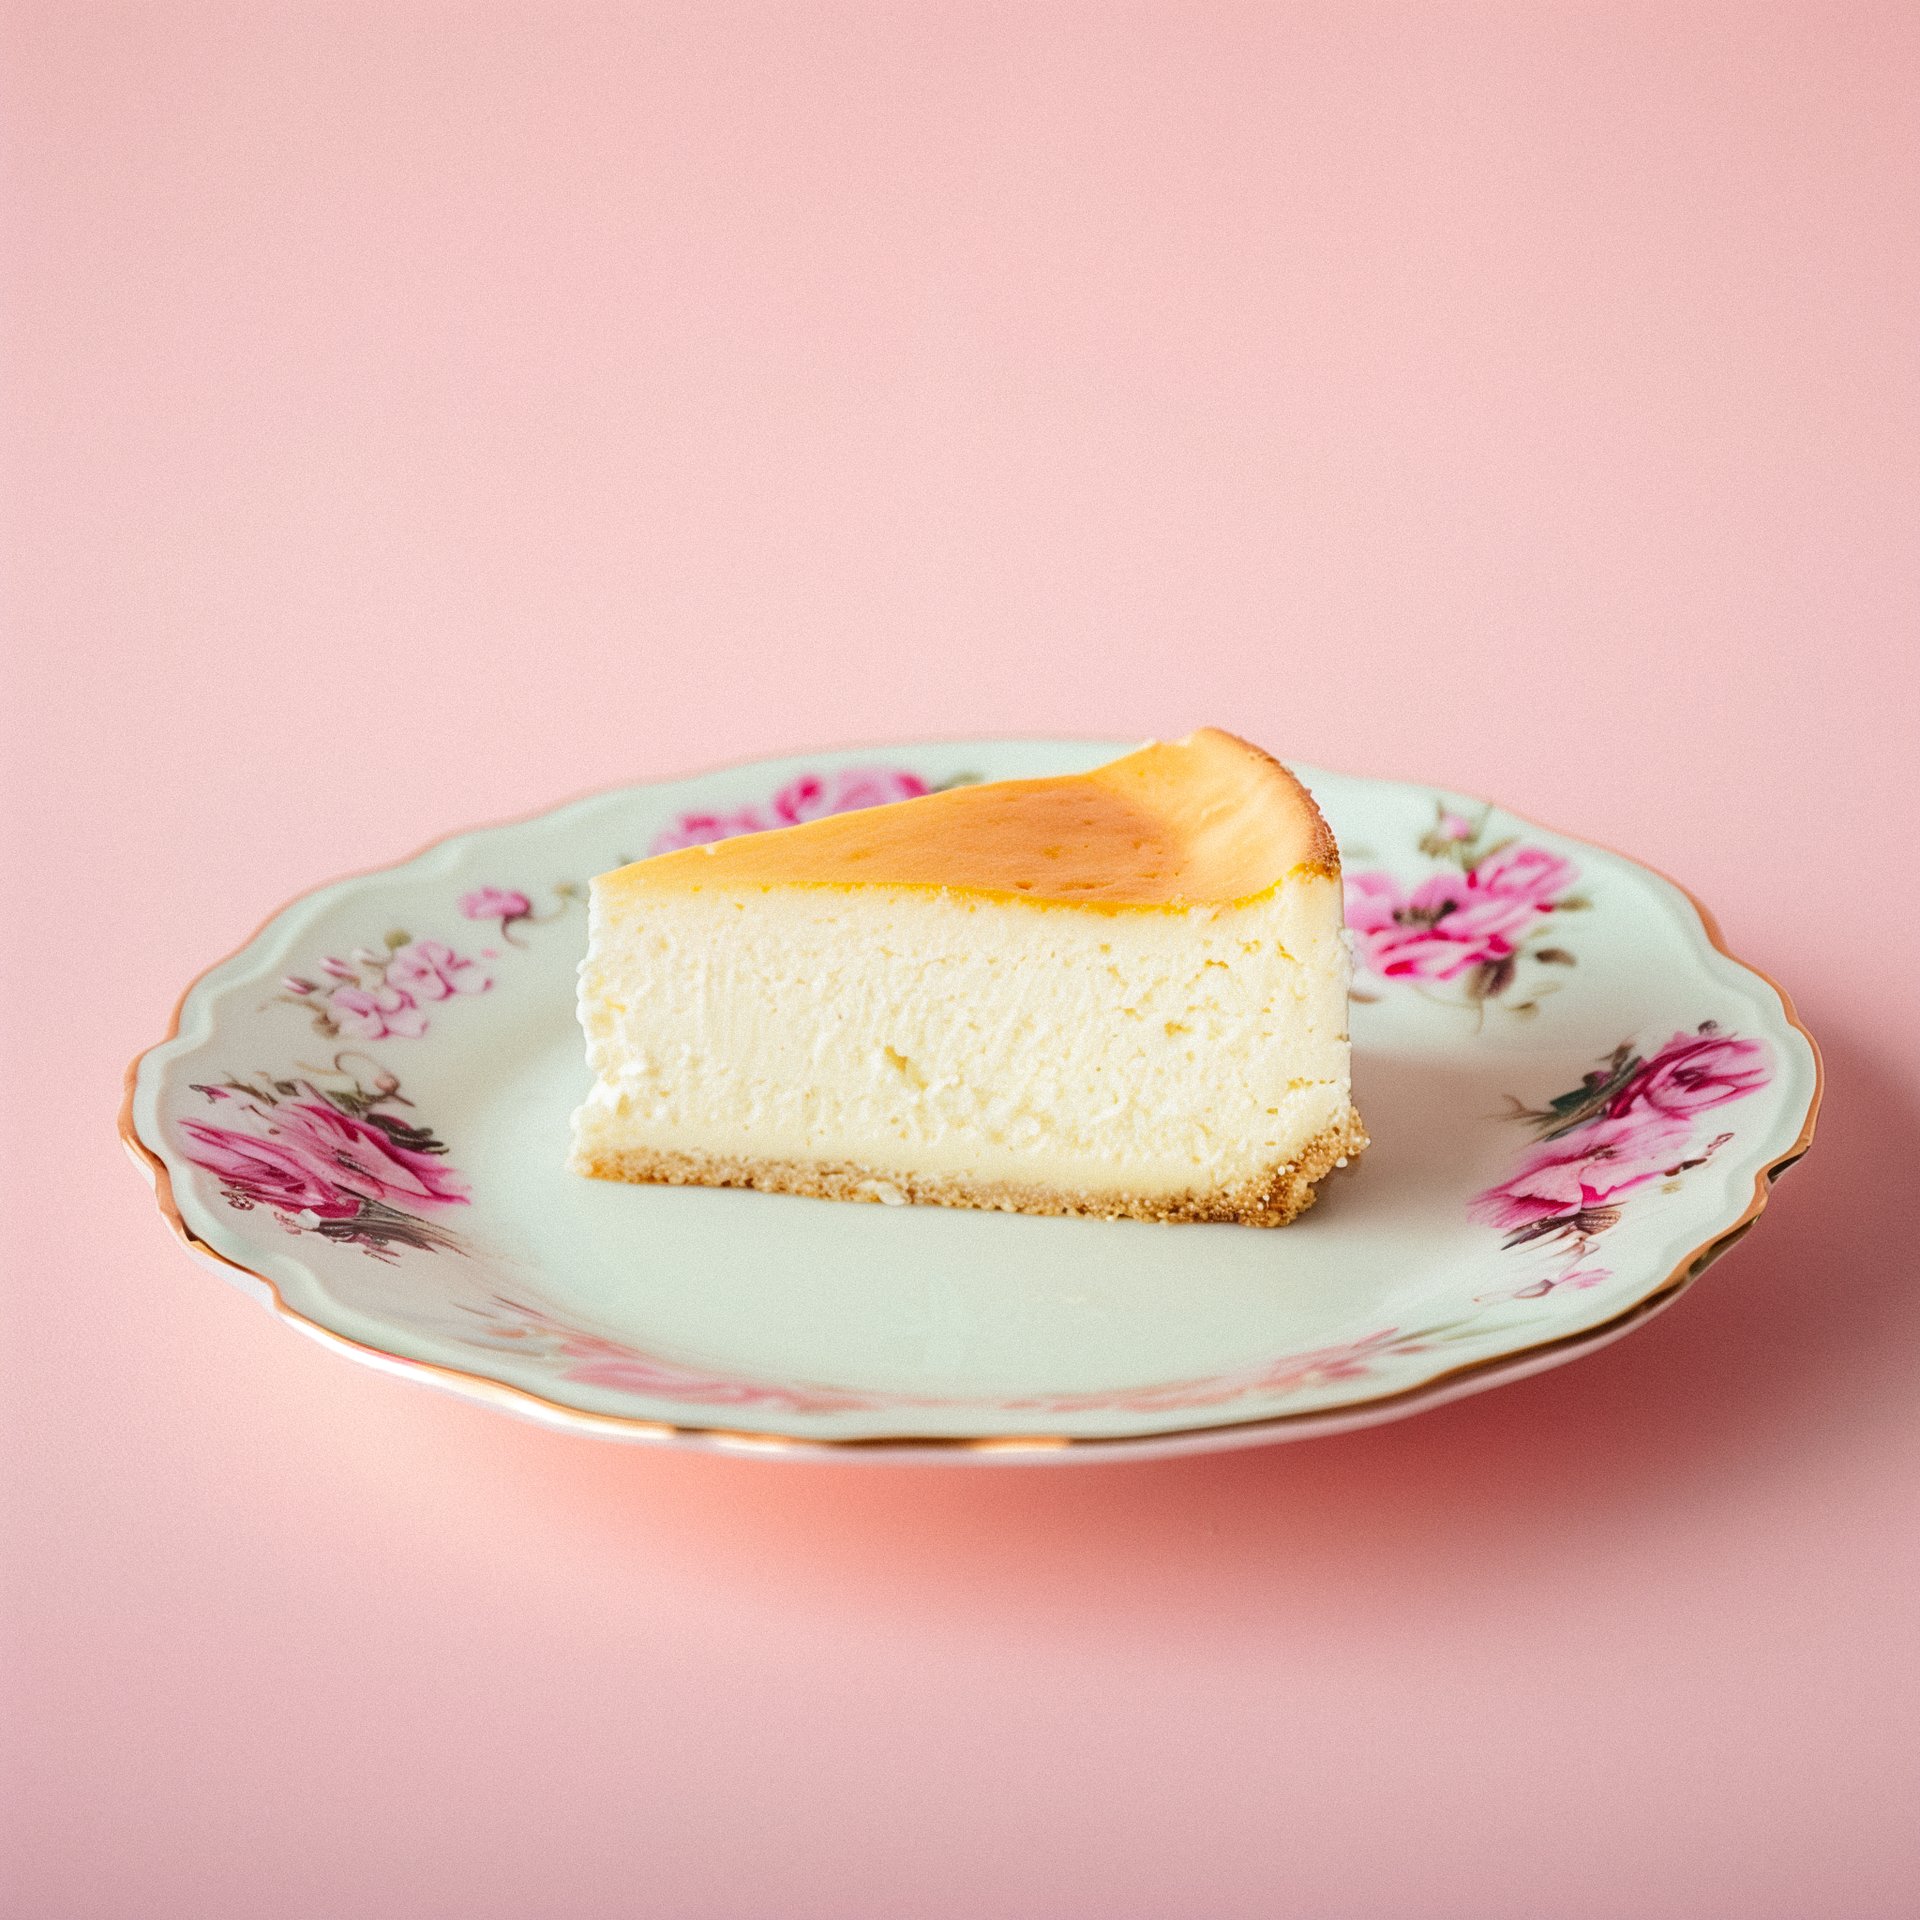 A piece of cheese cake on a plate